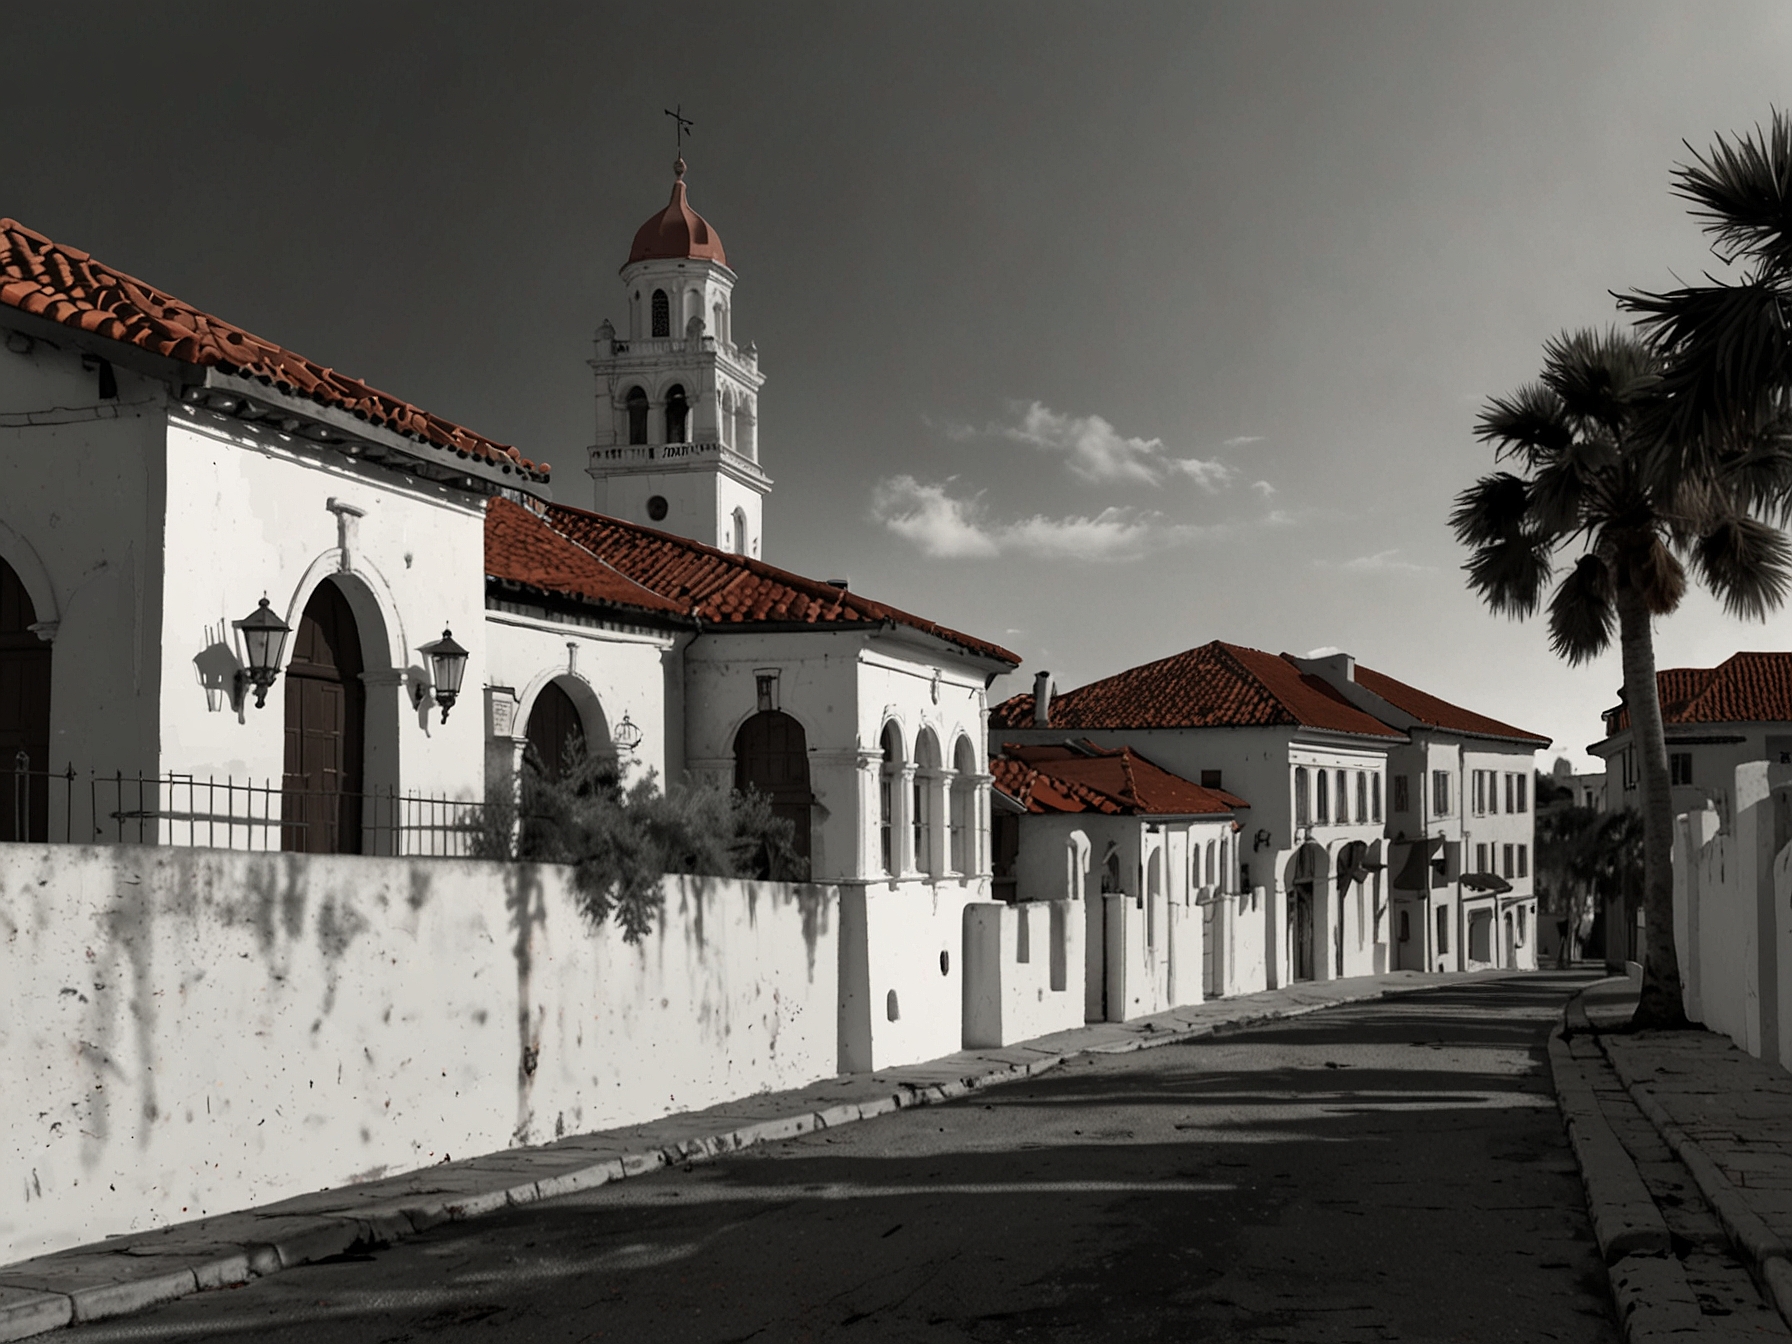 A view of St. Augustine's historic downtown featuring iconic Spanish colonial buildings with white stucco walls and red-tiled roofs, reflecting the city's European heritage.